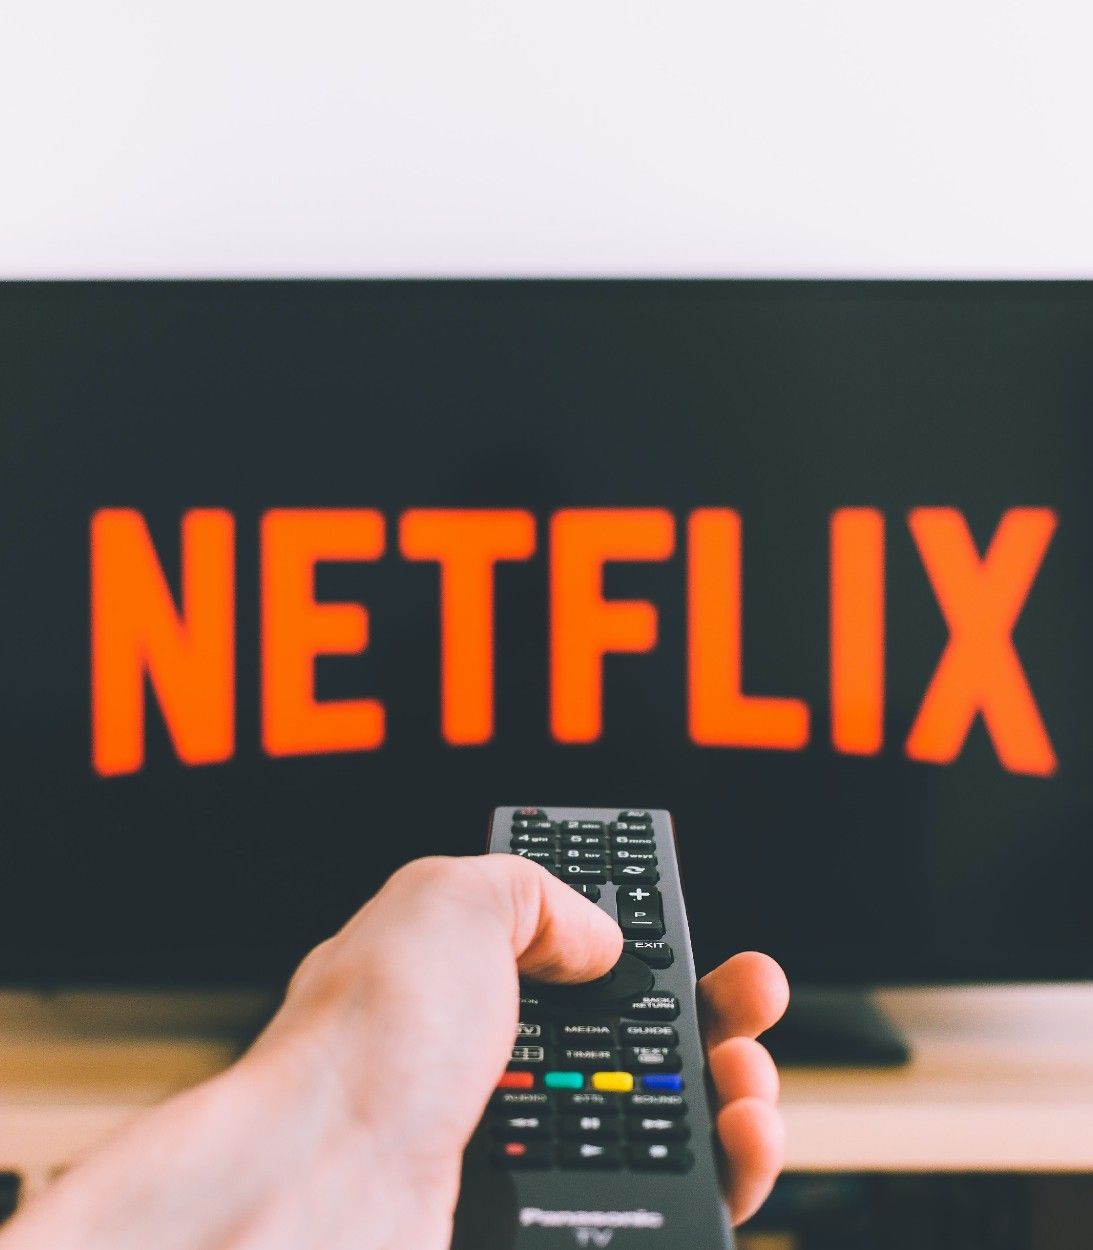 Over Half of Netflix Subscribers Share Their Password, Claims Study